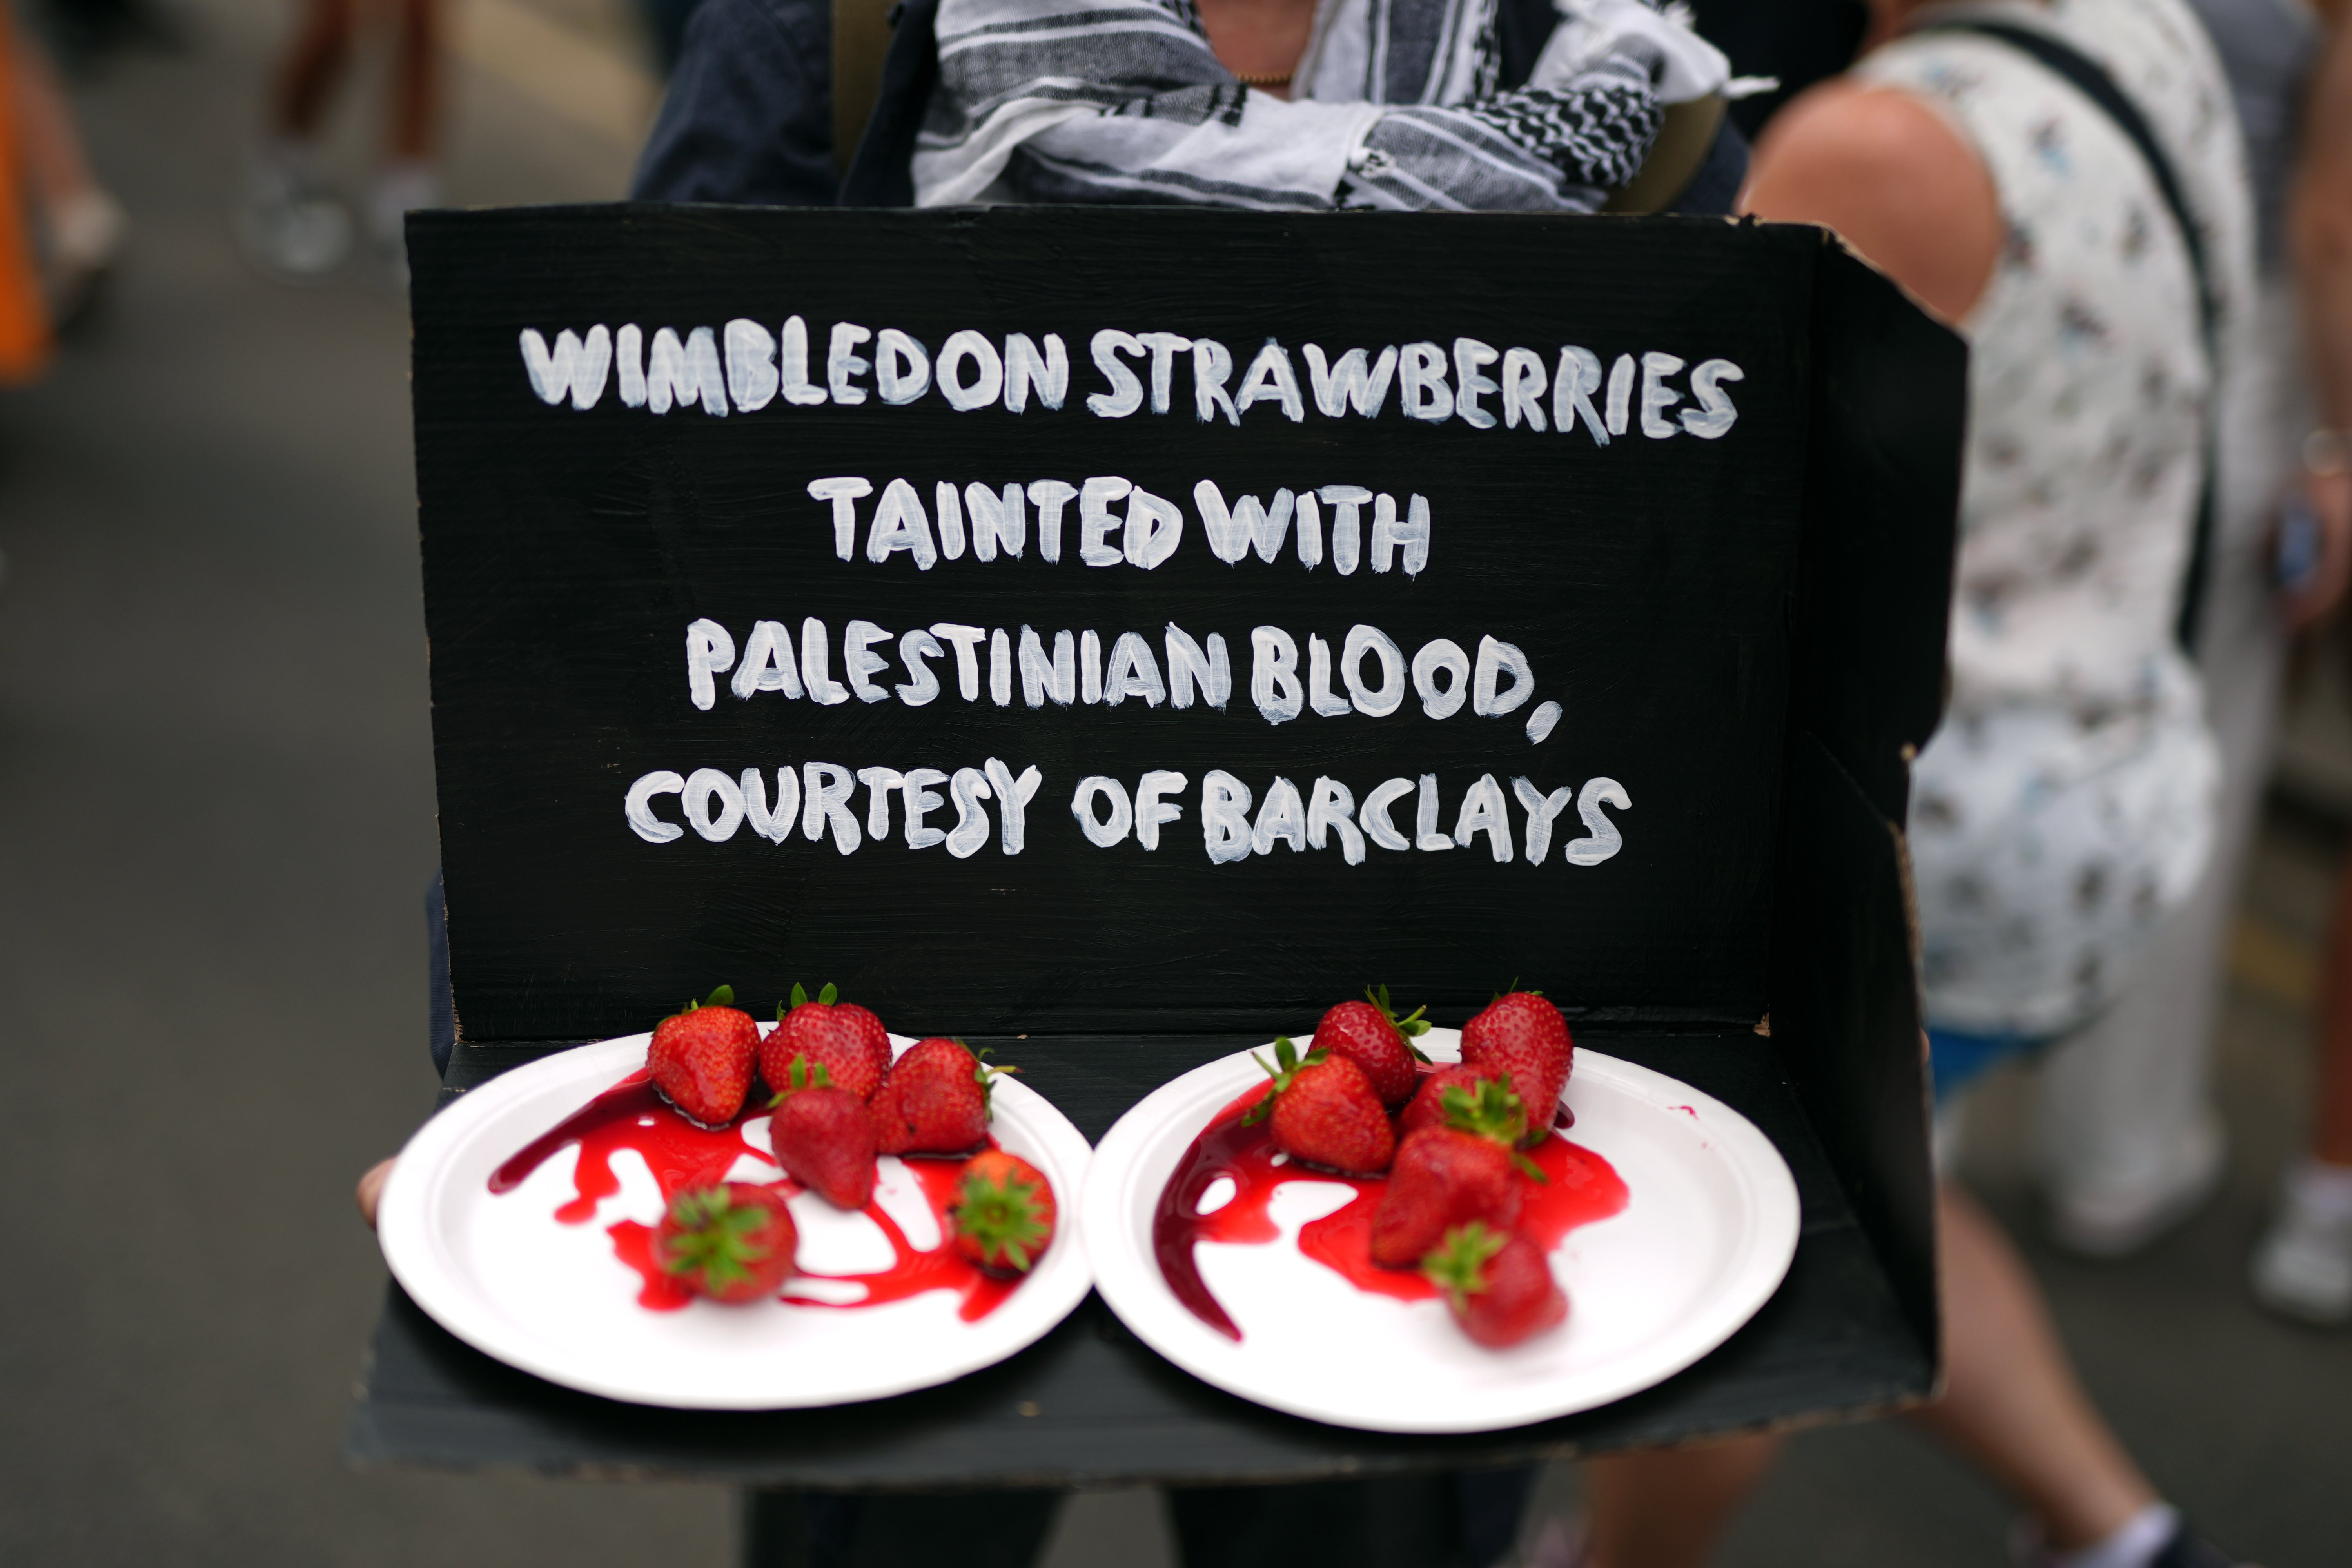 Protesters used Wimbledon’s iconic strawberries in their demonstration (Jordan Pettitt/PA)